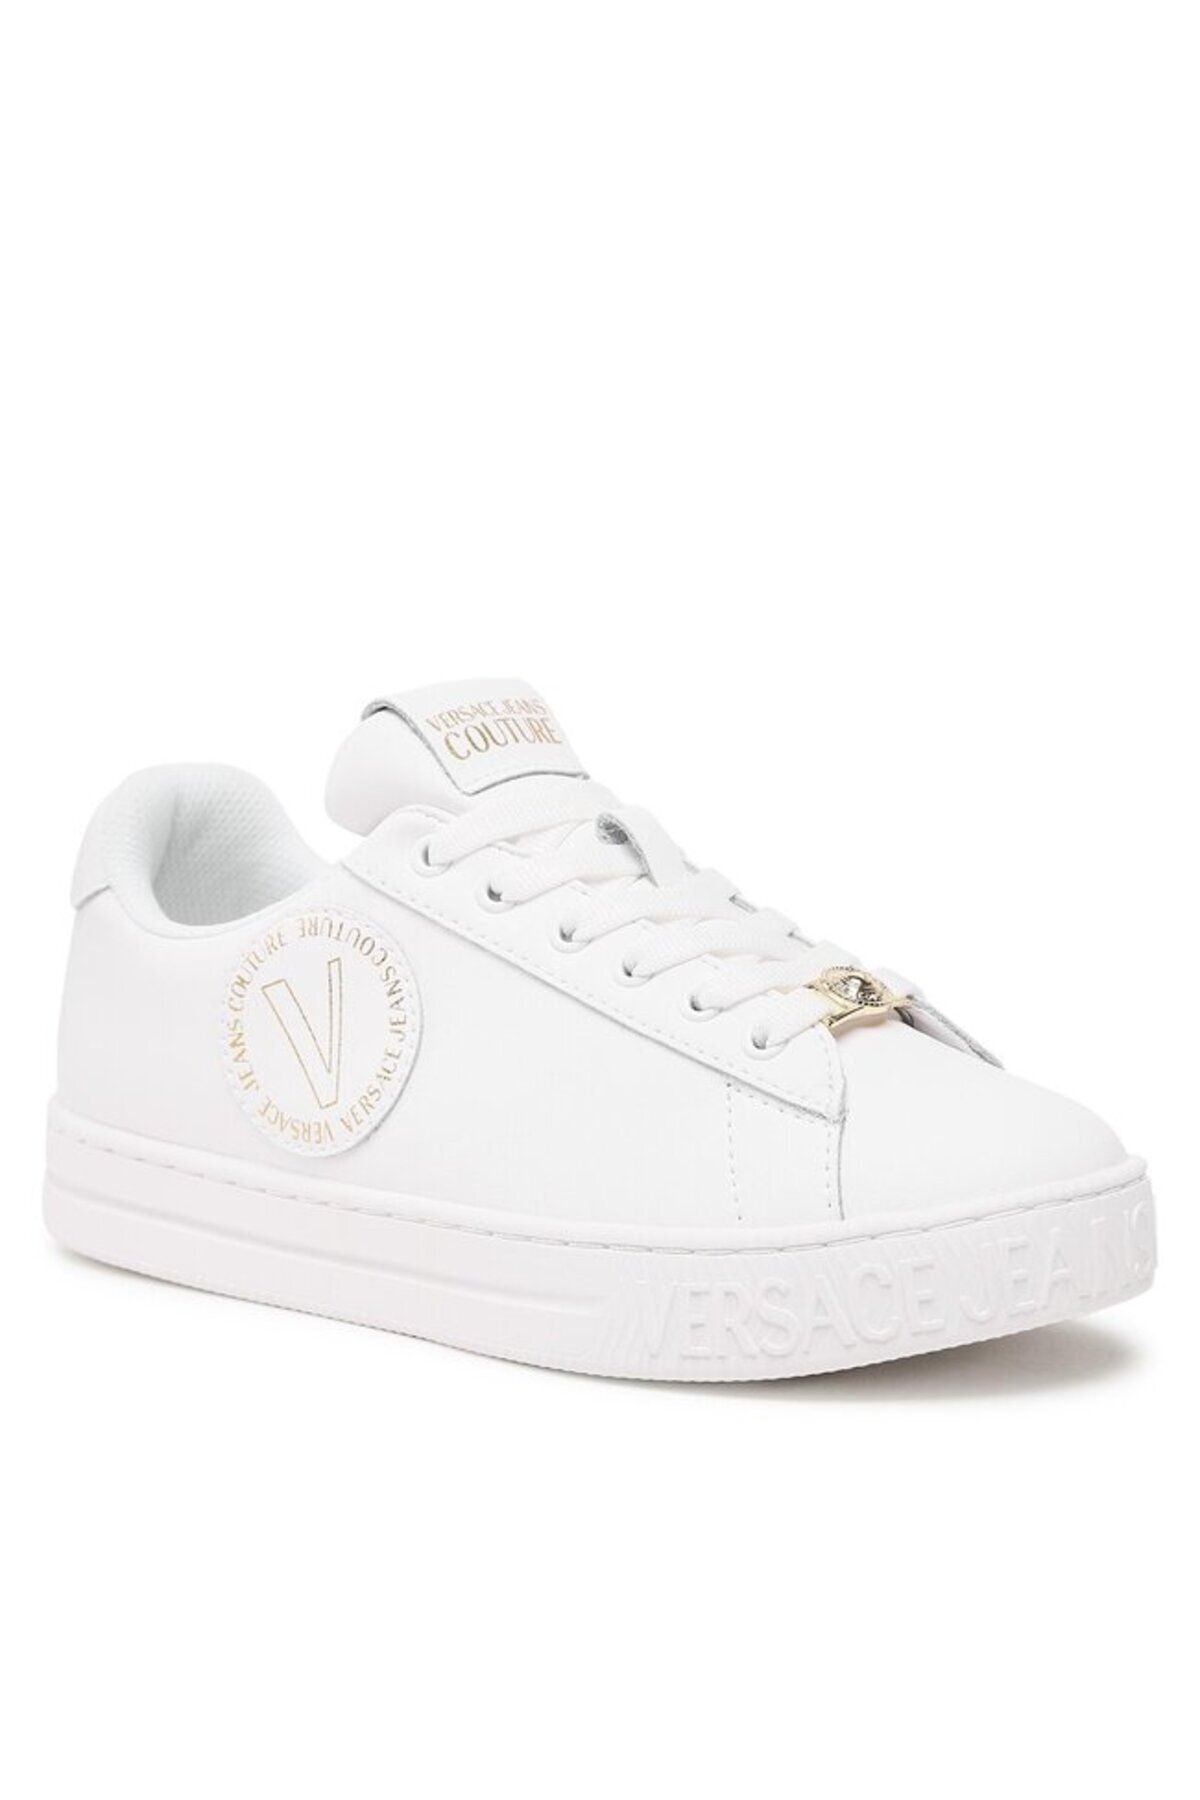 VERSACE Sneakers in white/ gold